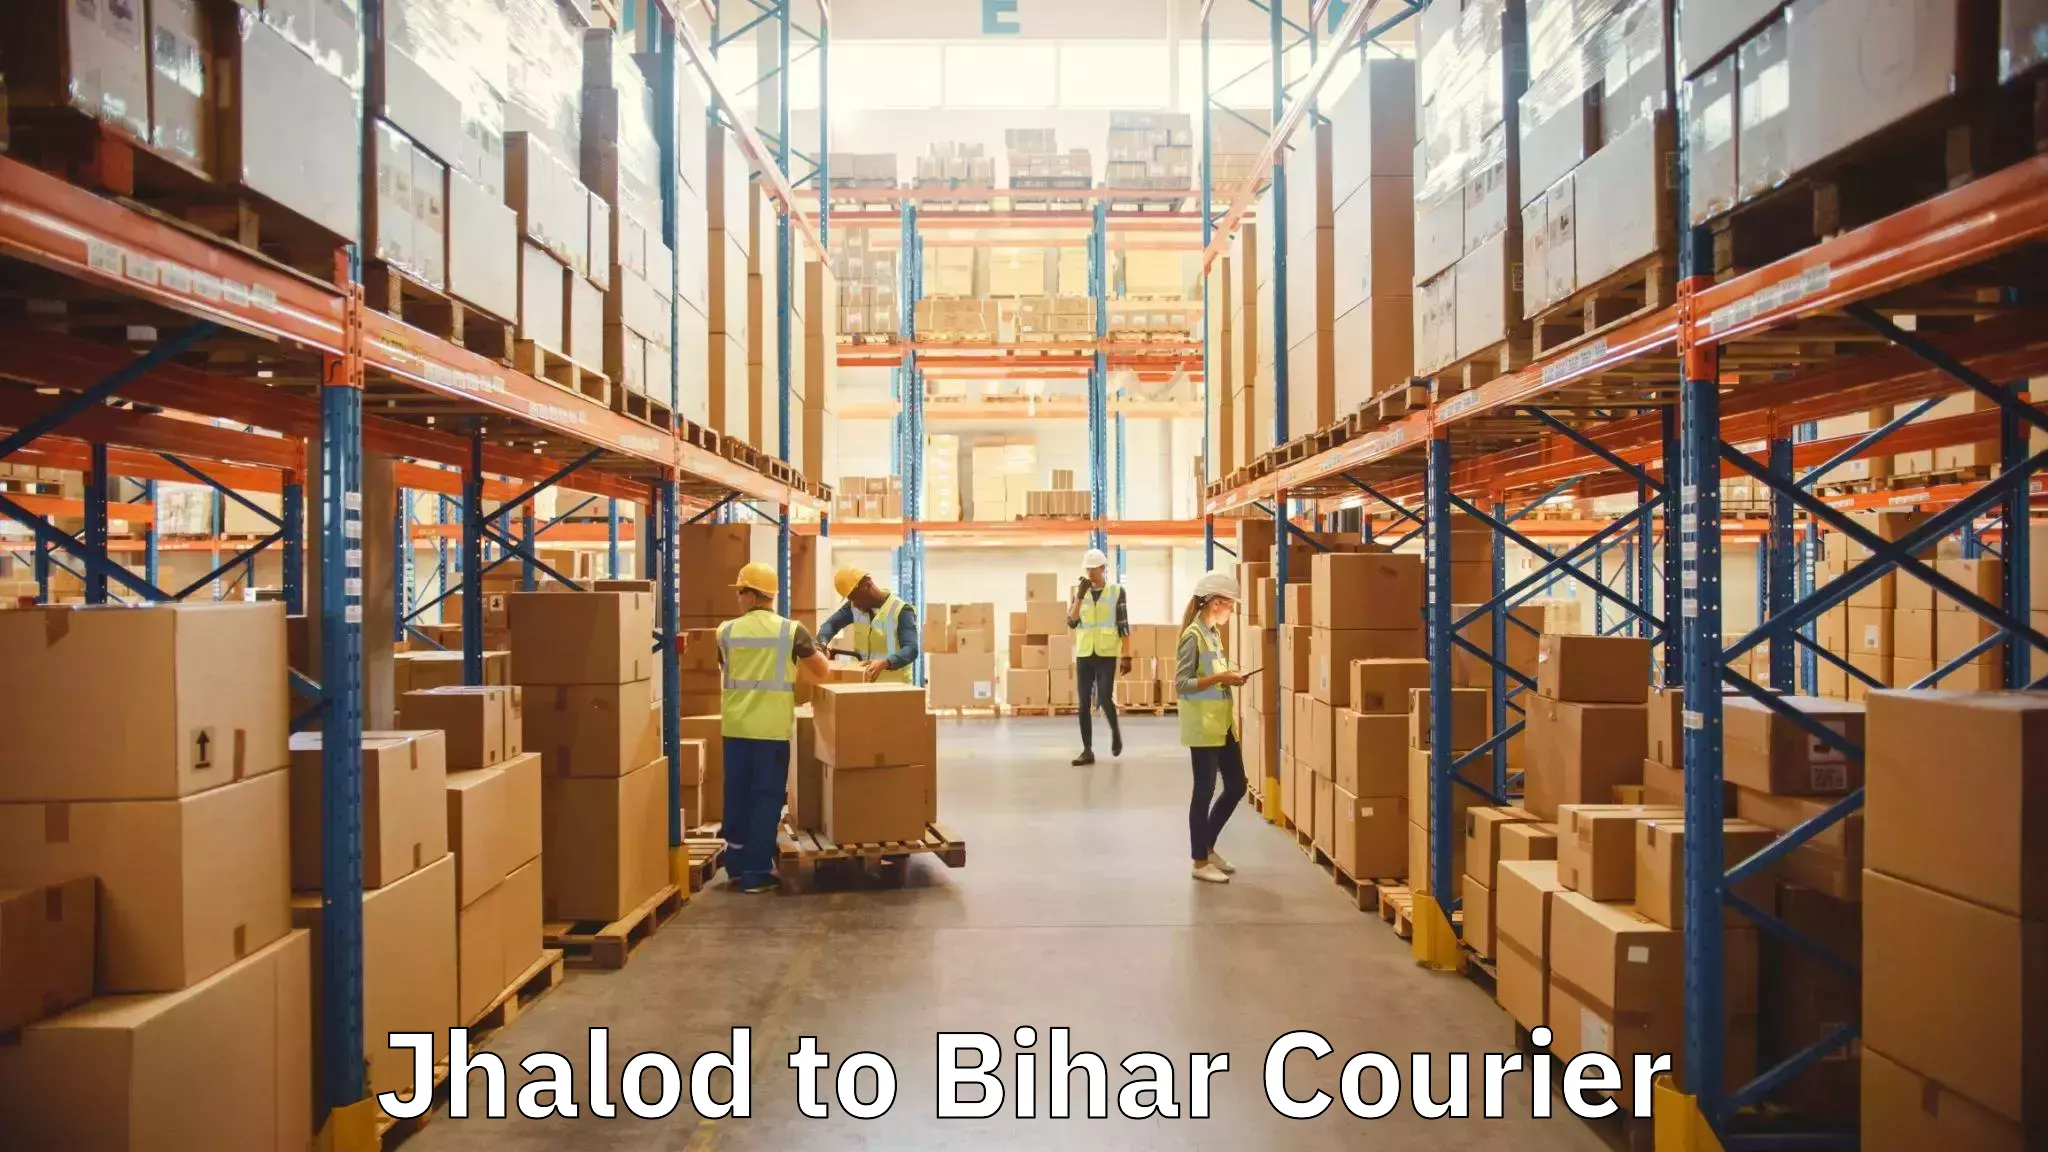 Professional moving assistance in Jhalod to Bihta